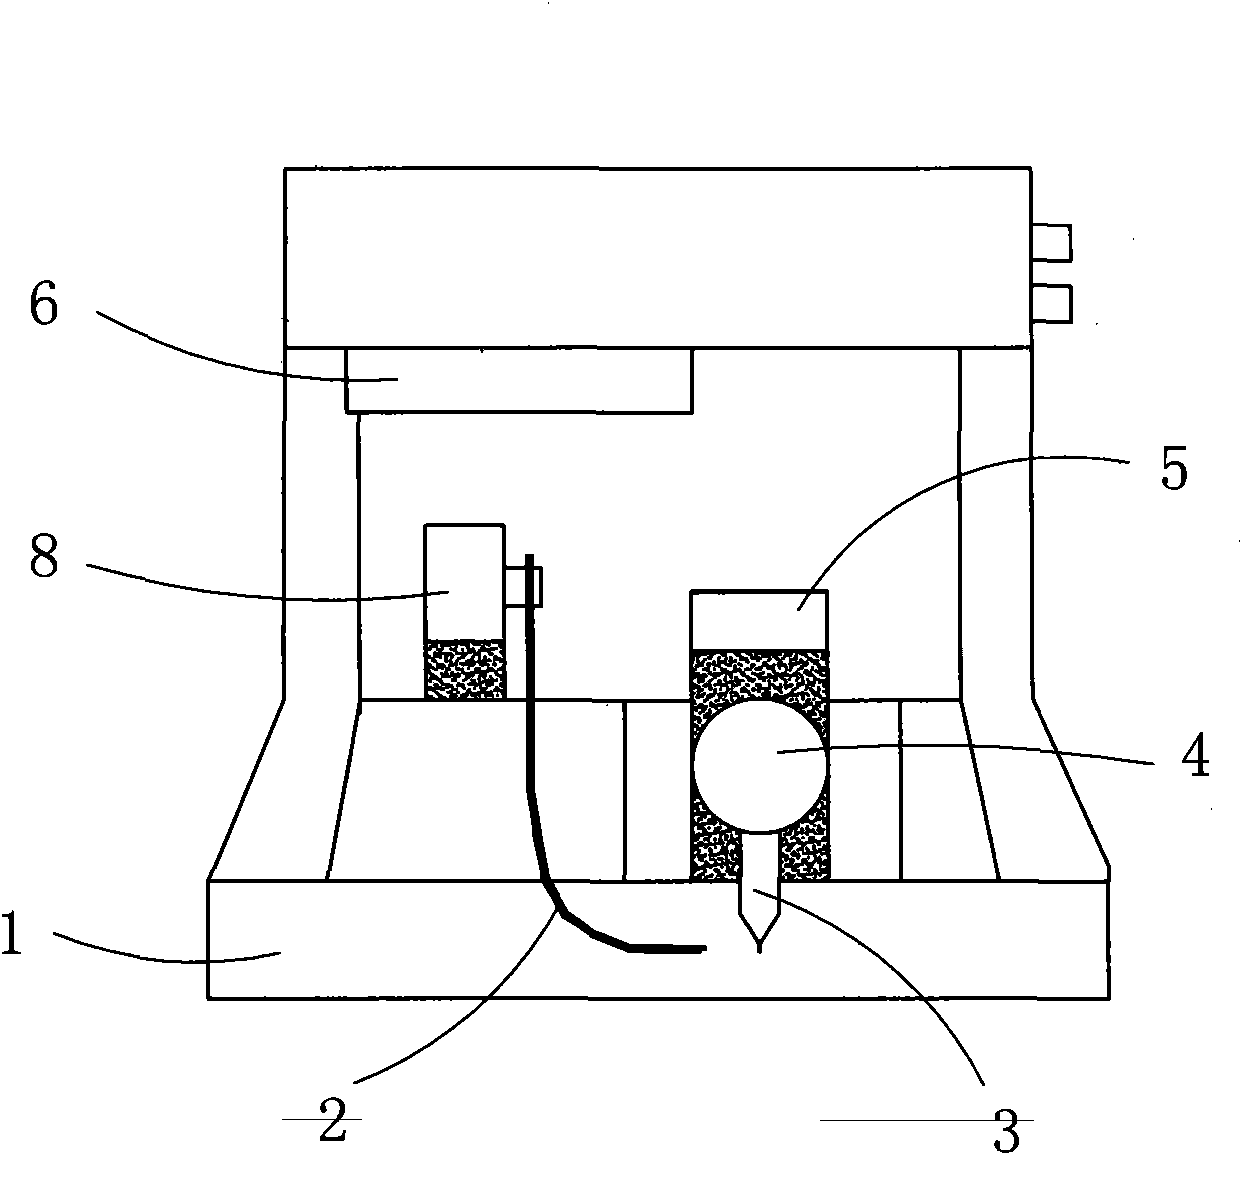 Method for bonding copper wire of power device